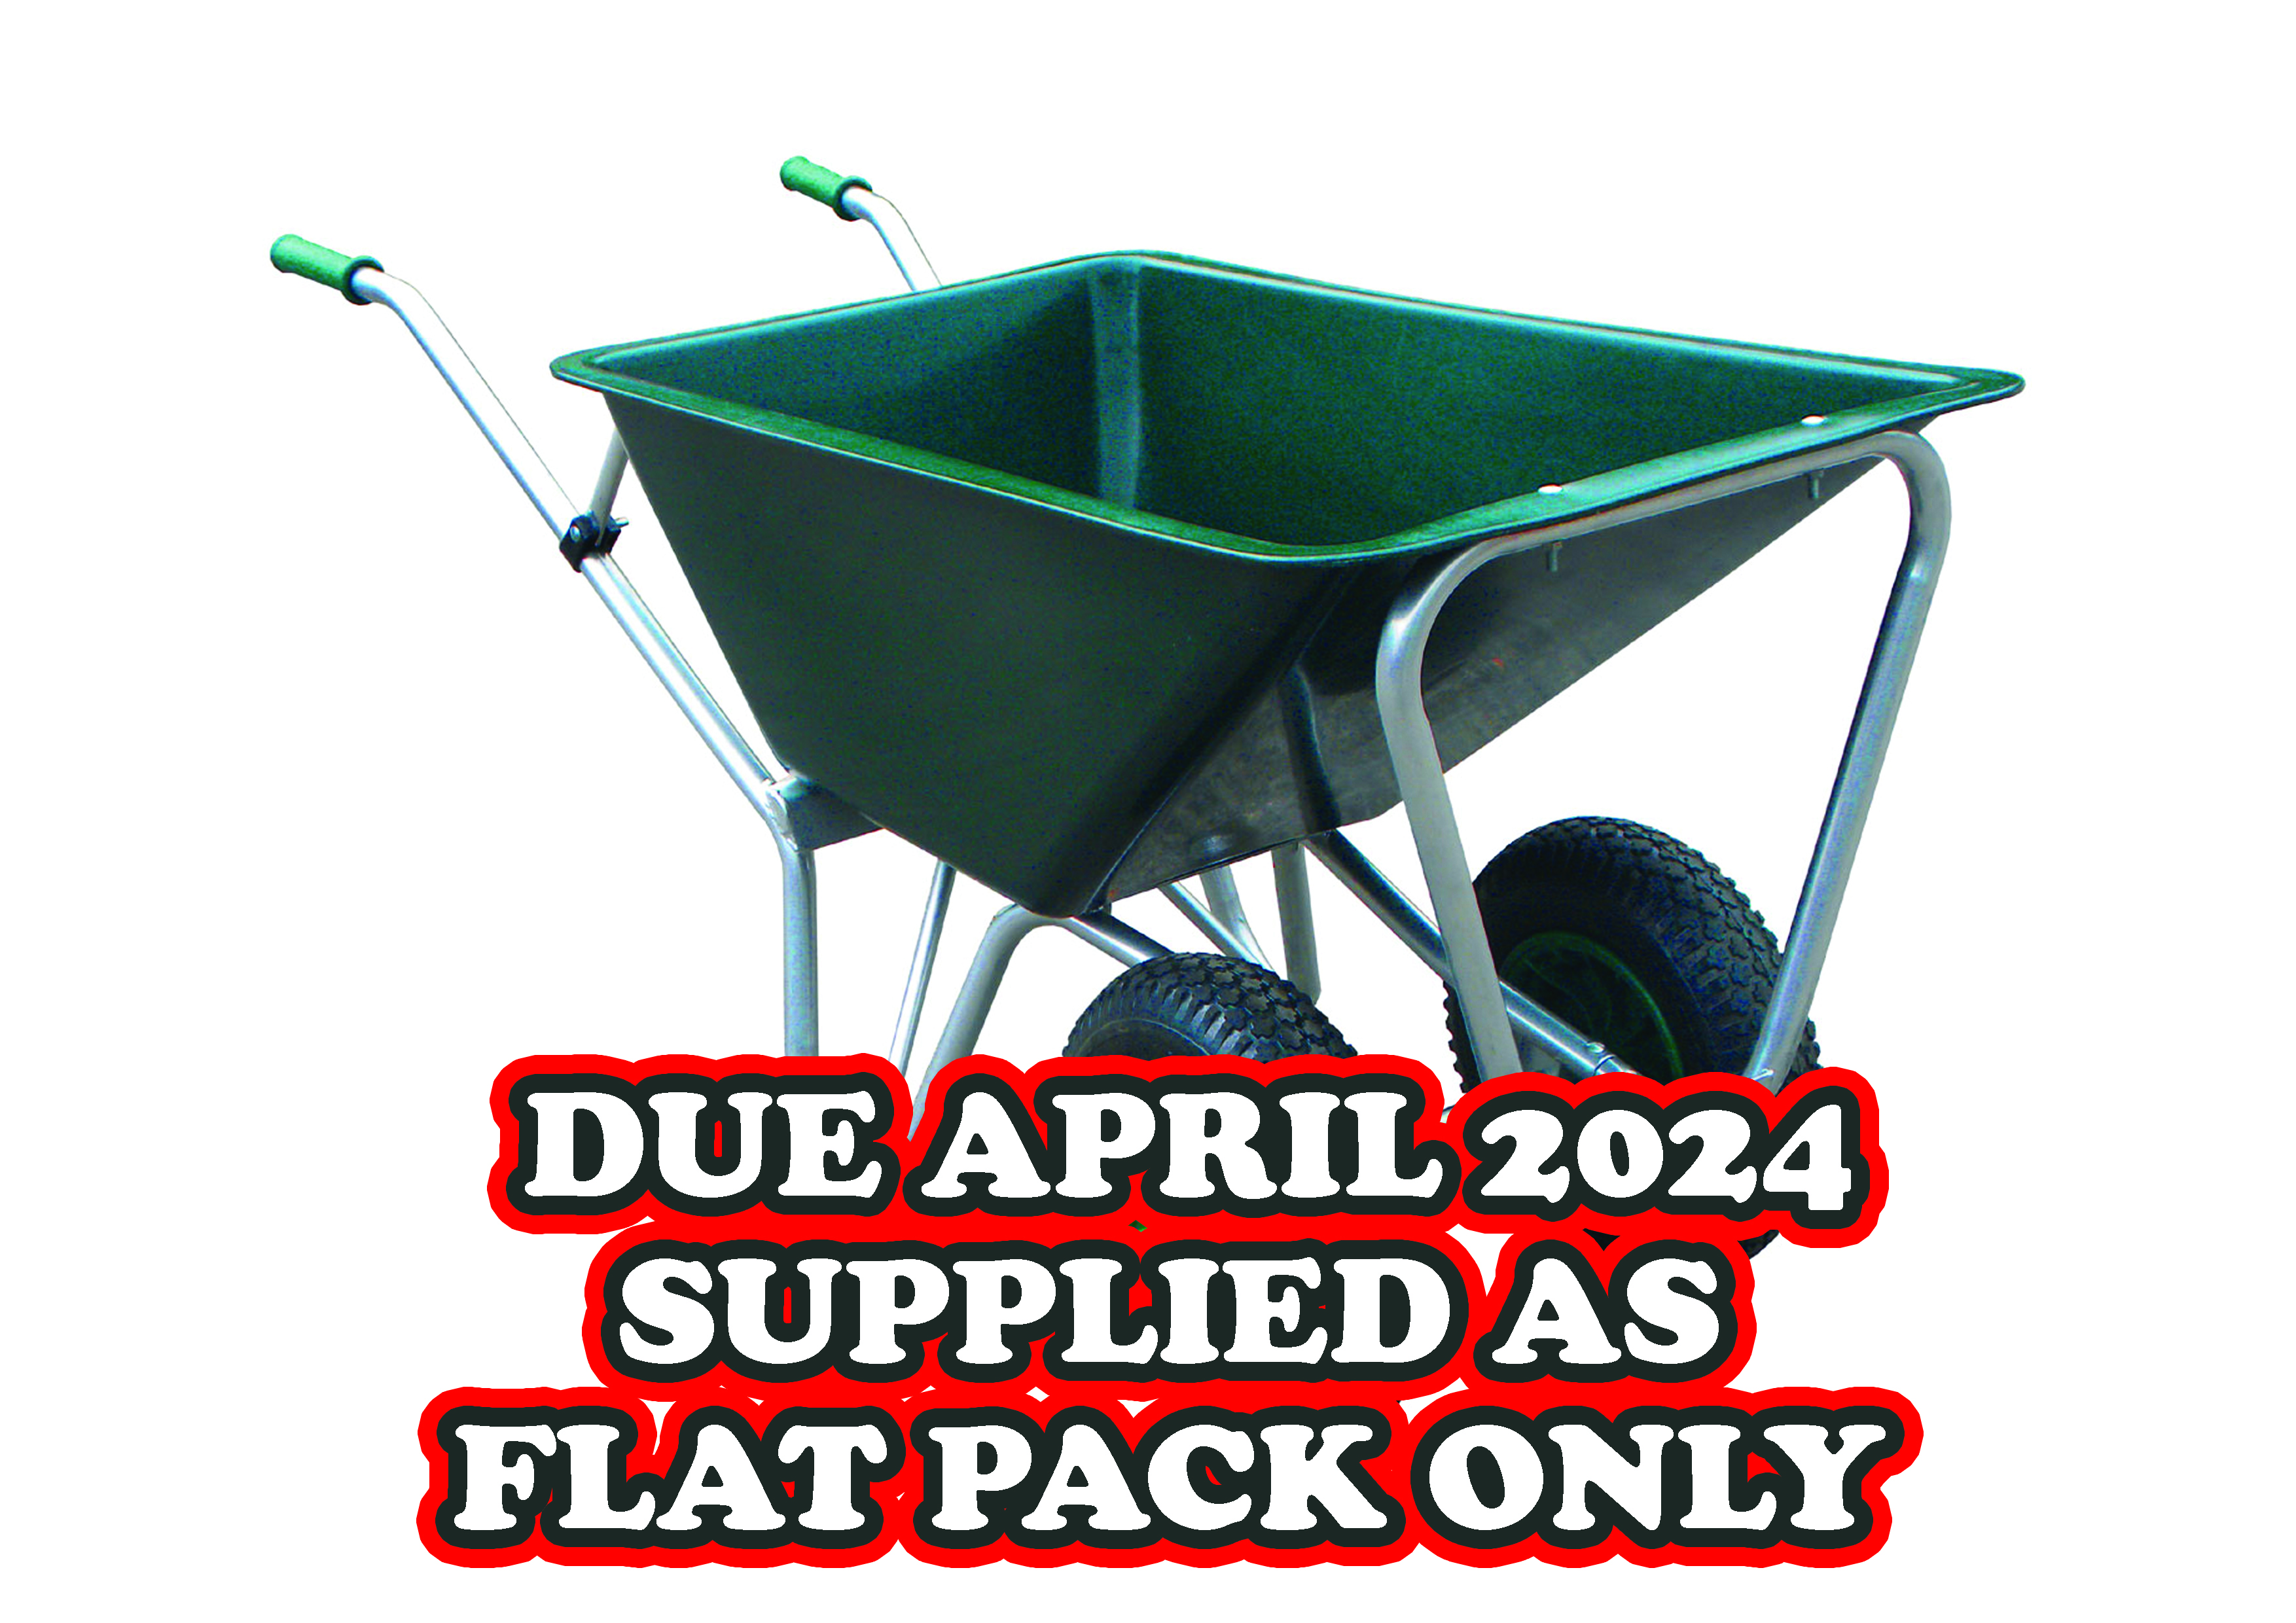 DUE APRIL 2024 Stable Mate Wheelbarrow Plated Steel Frame